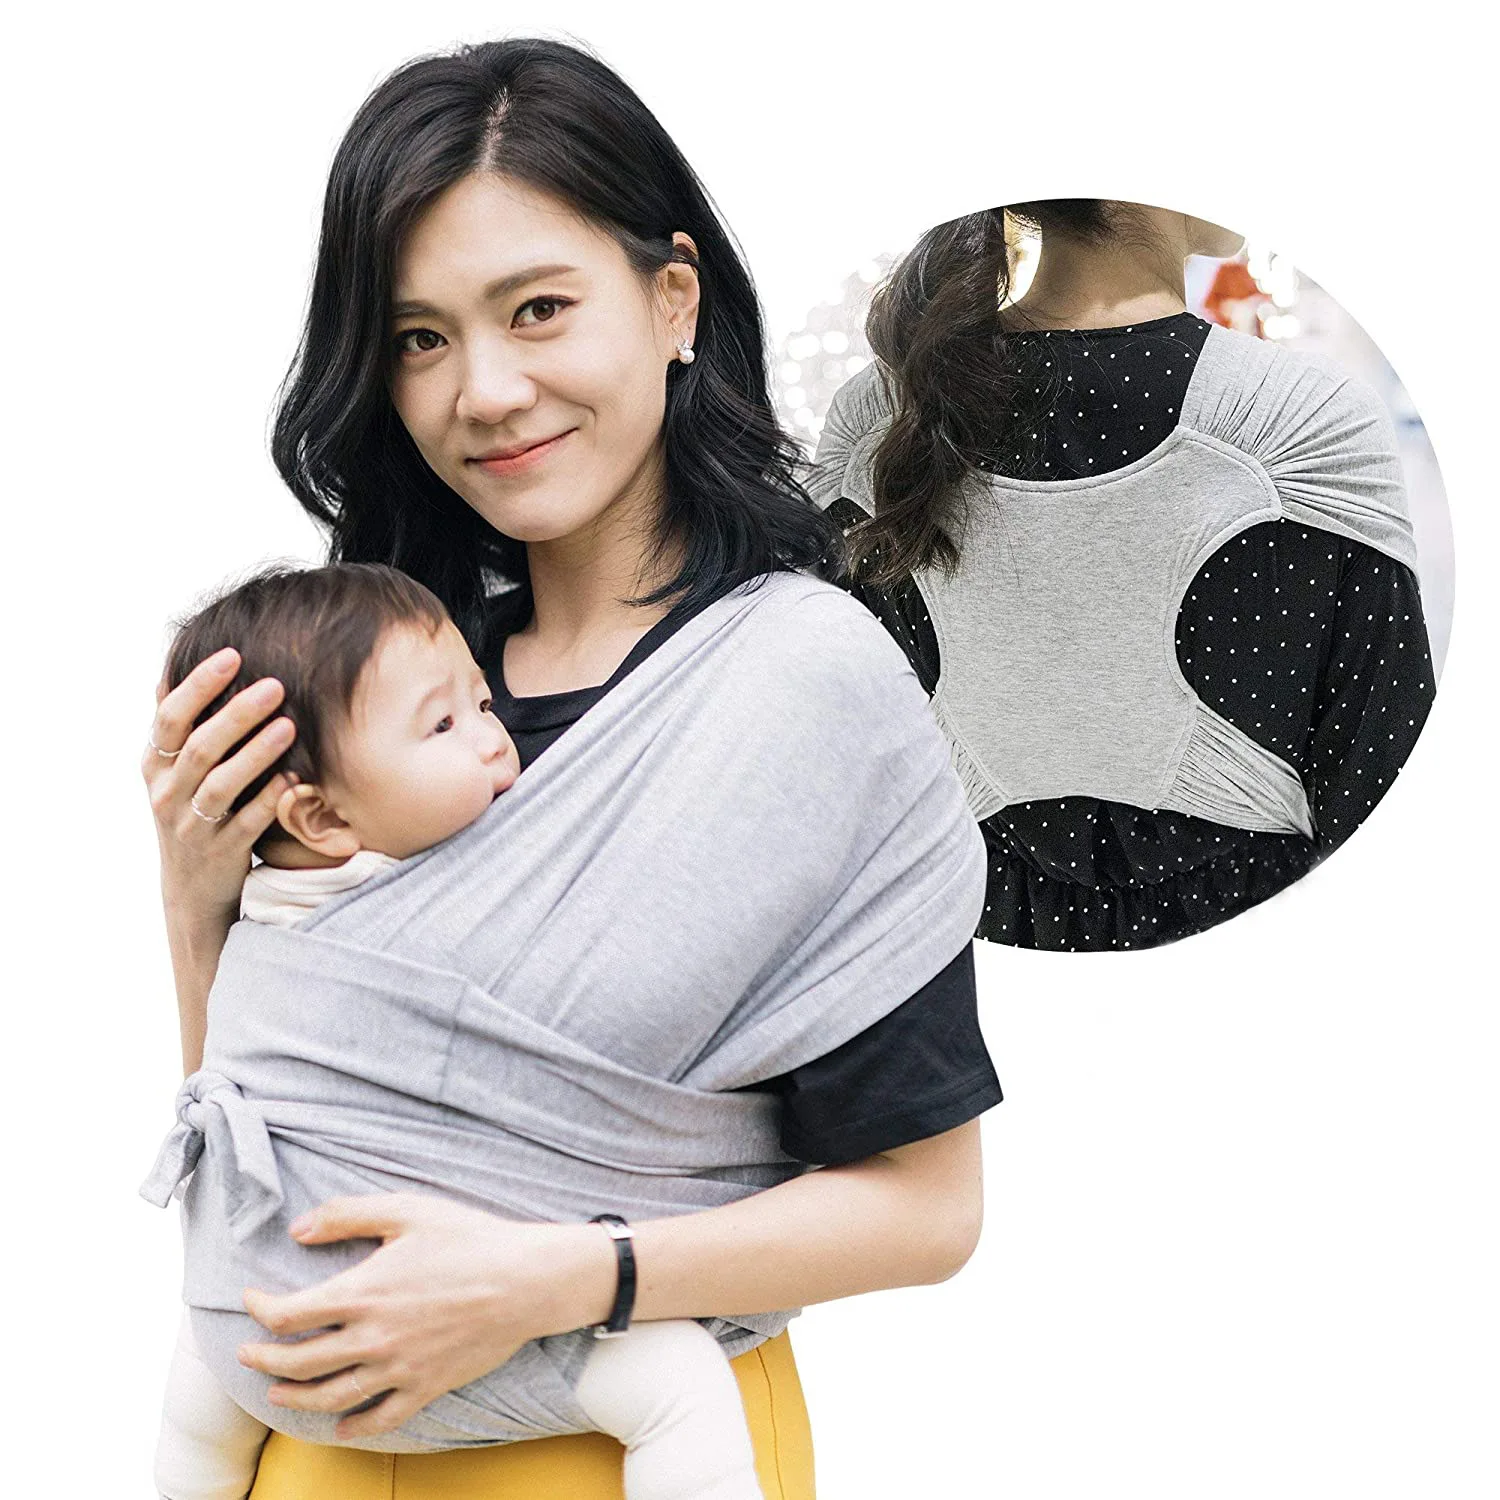 

Baby Carrier Scarf Harnesses Ergonomic Kangaroo for Baby Comfortable Hip Seat Rest for Traveling Soft-structured New Born Items